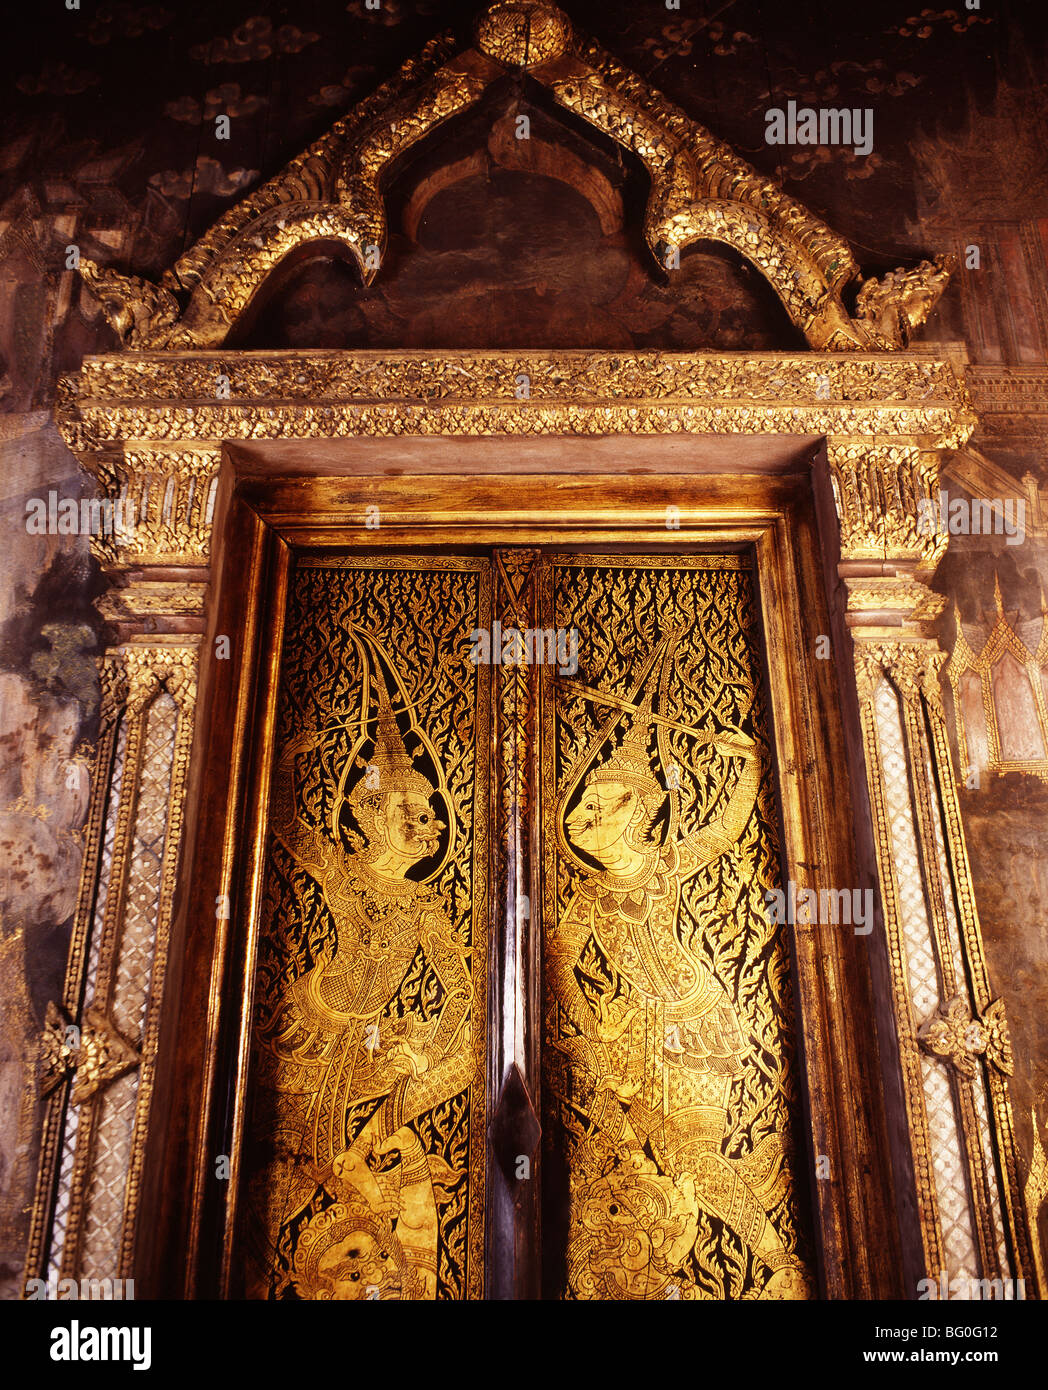 Door from 17th century, Thailand, Southeast Asia, Asia Stock Photo